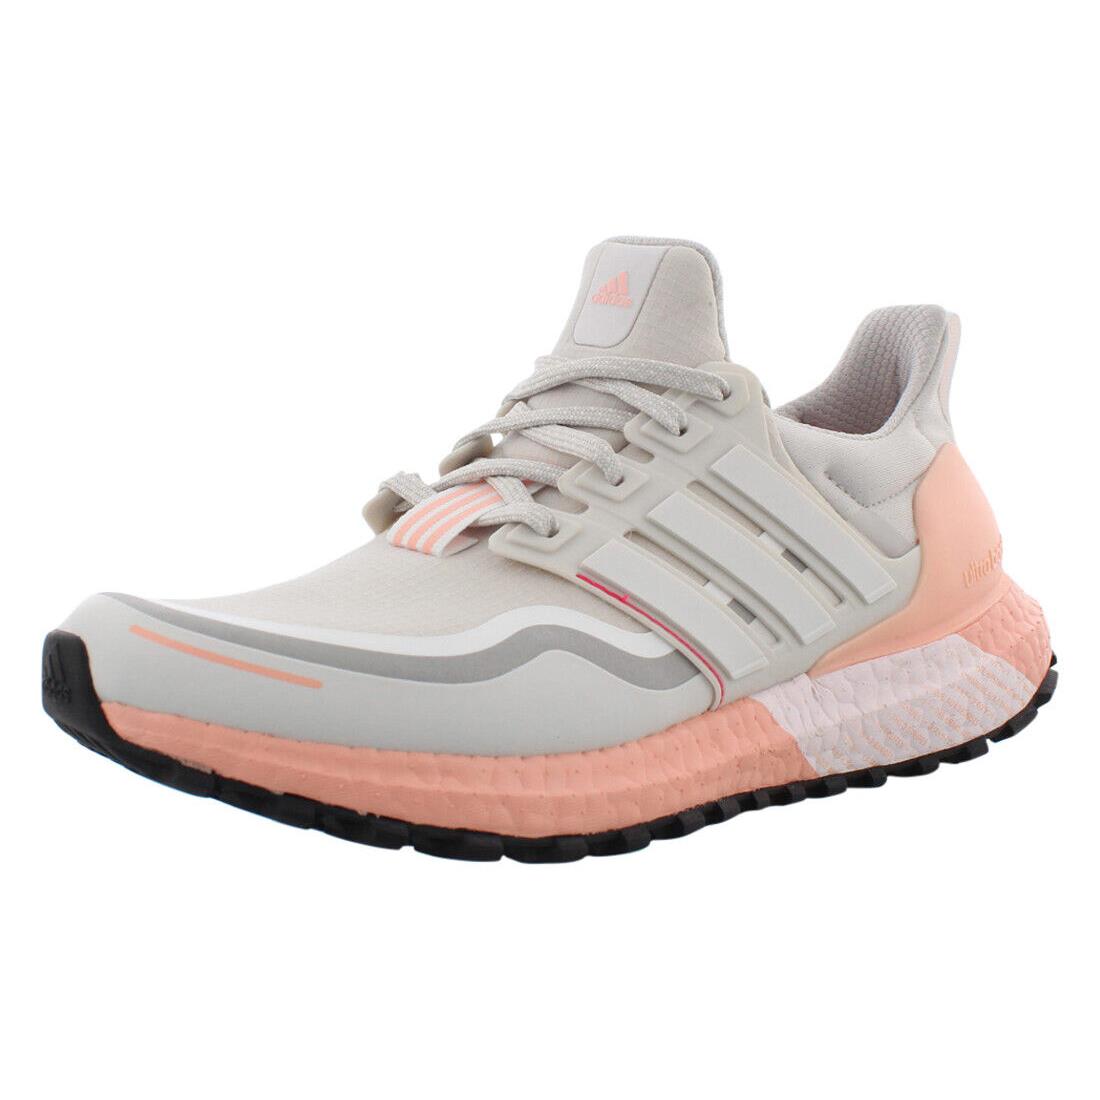 Adidas Ultra Boost Guard Womens Shoes - Grey One/Cloud White/Grey Two, Main: Grey